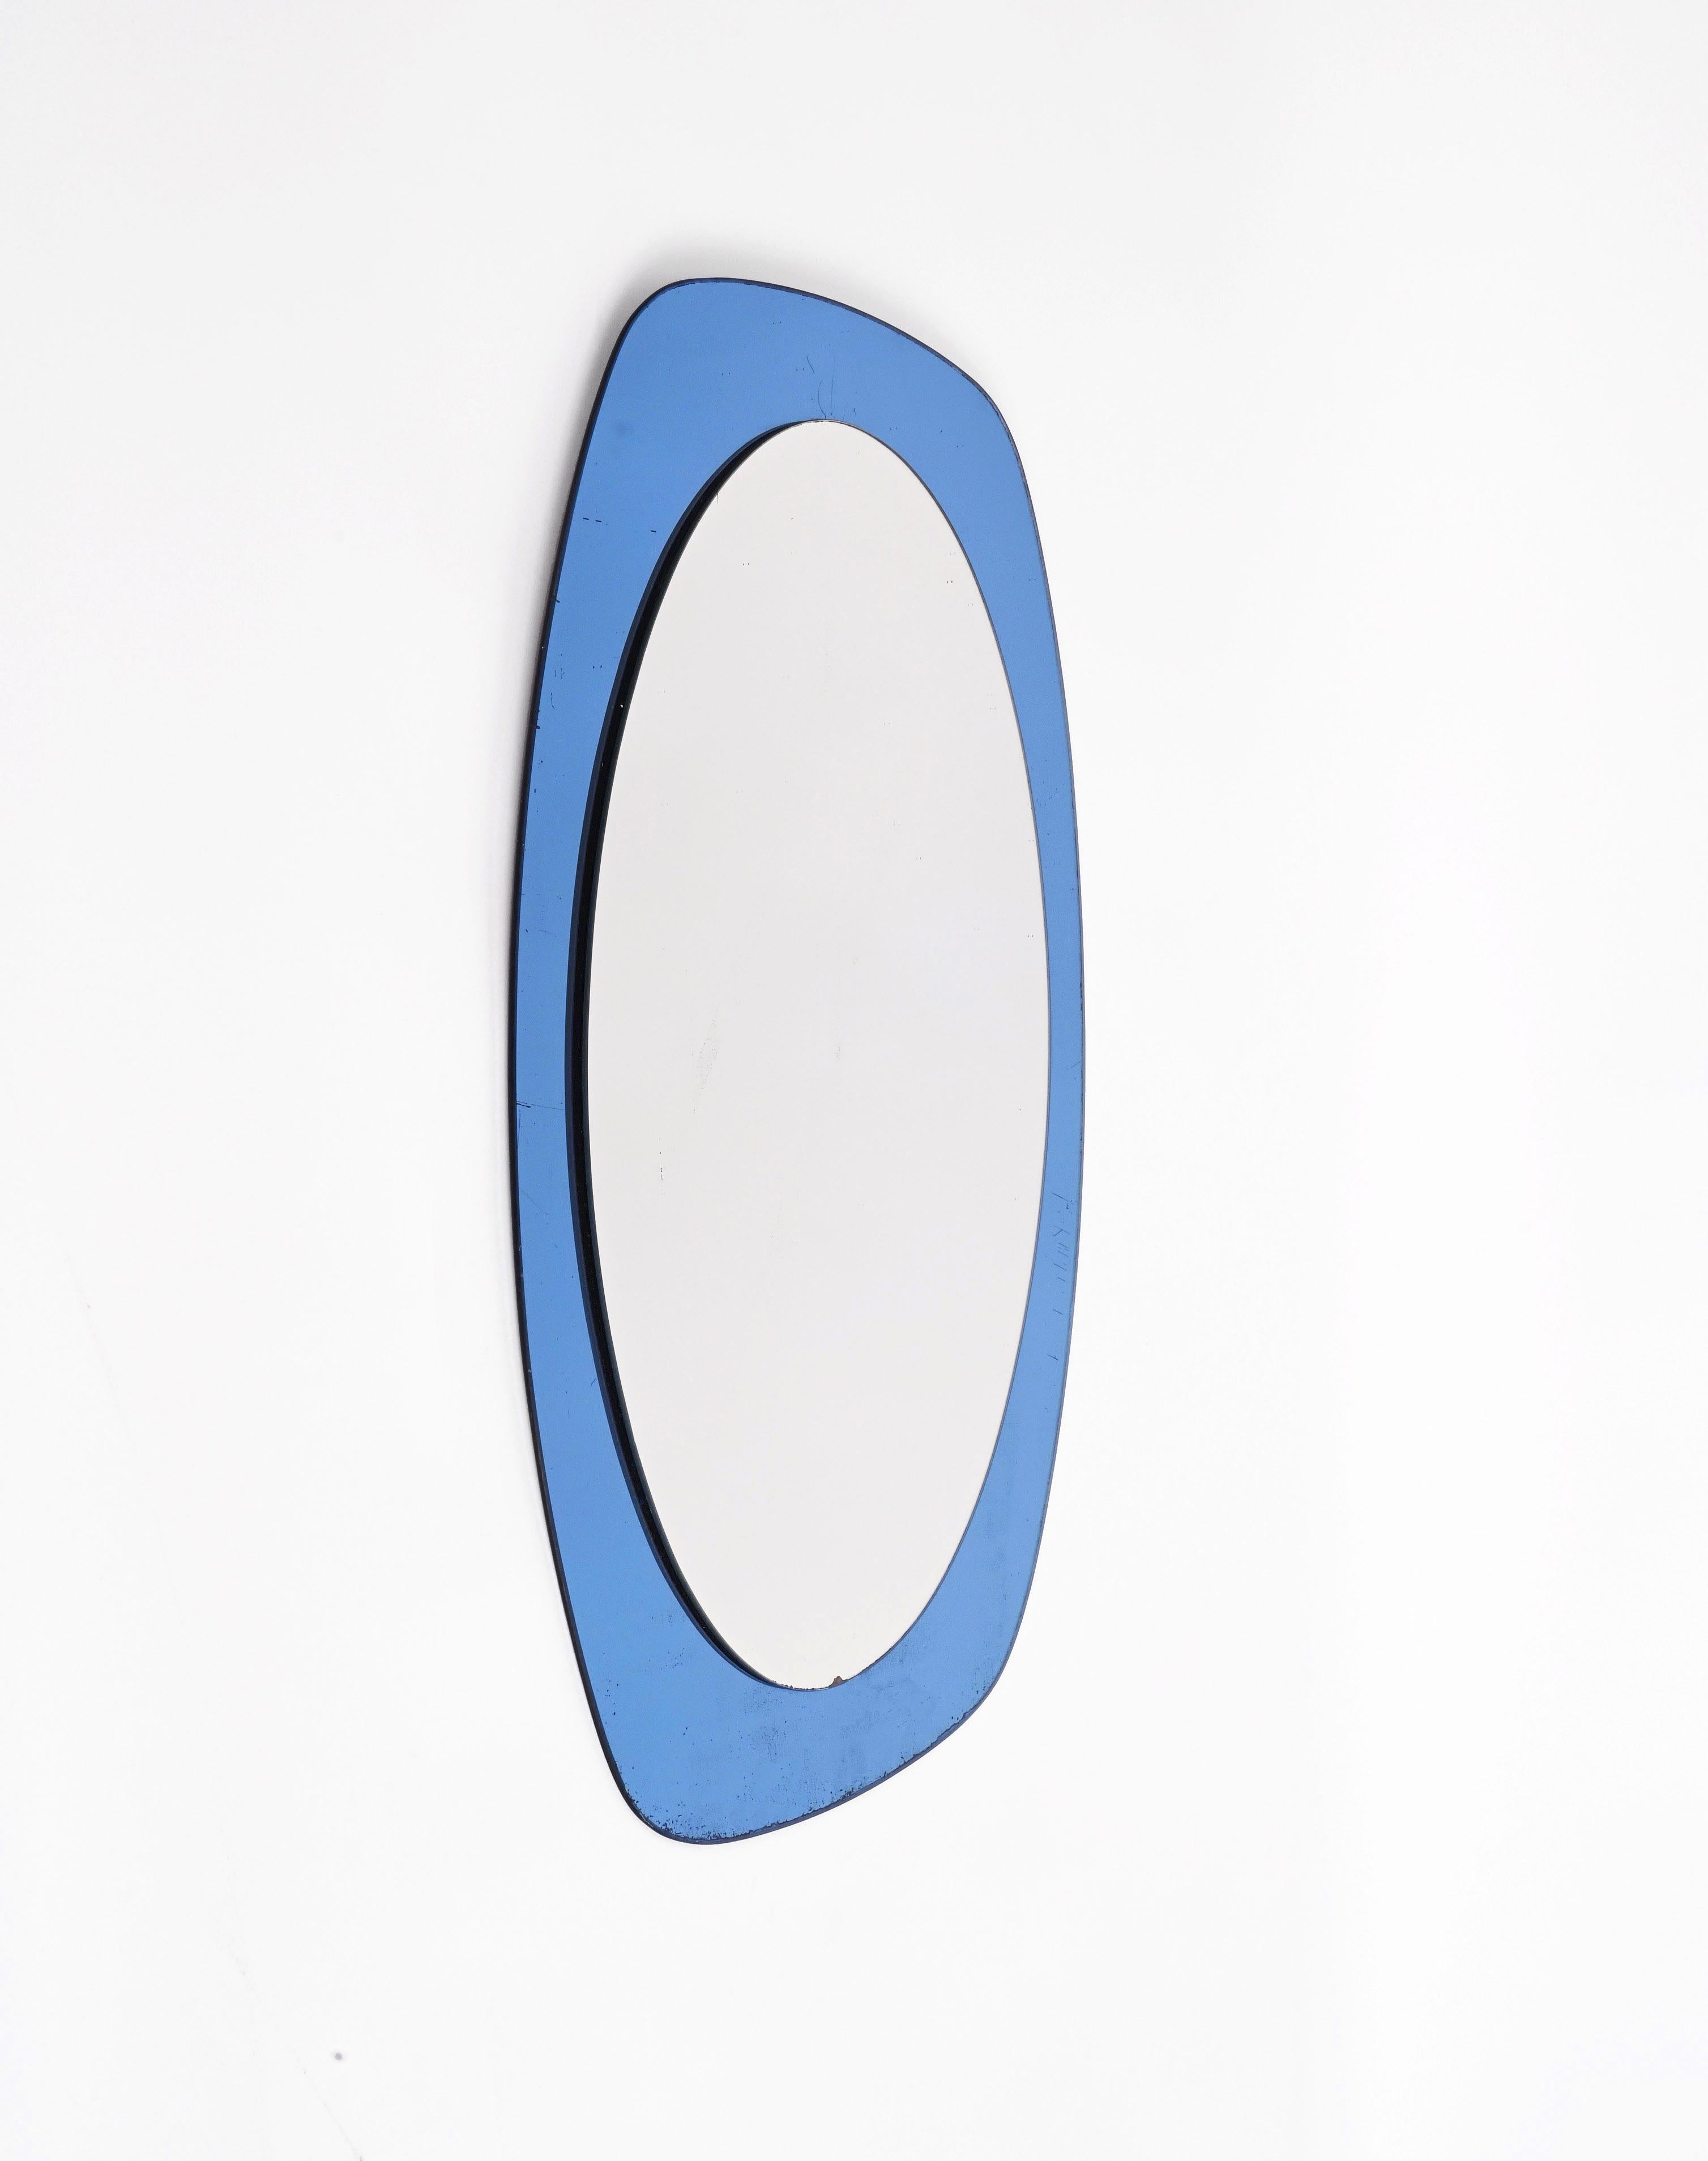 Amazing oval double-levelled midcentury mirror with a blue glass frame. This wonderful piece was produced in Italy during the 1960s and it is attributed to Crystal Art.

In its essential and pure mid-century design and lines, this marvellous item